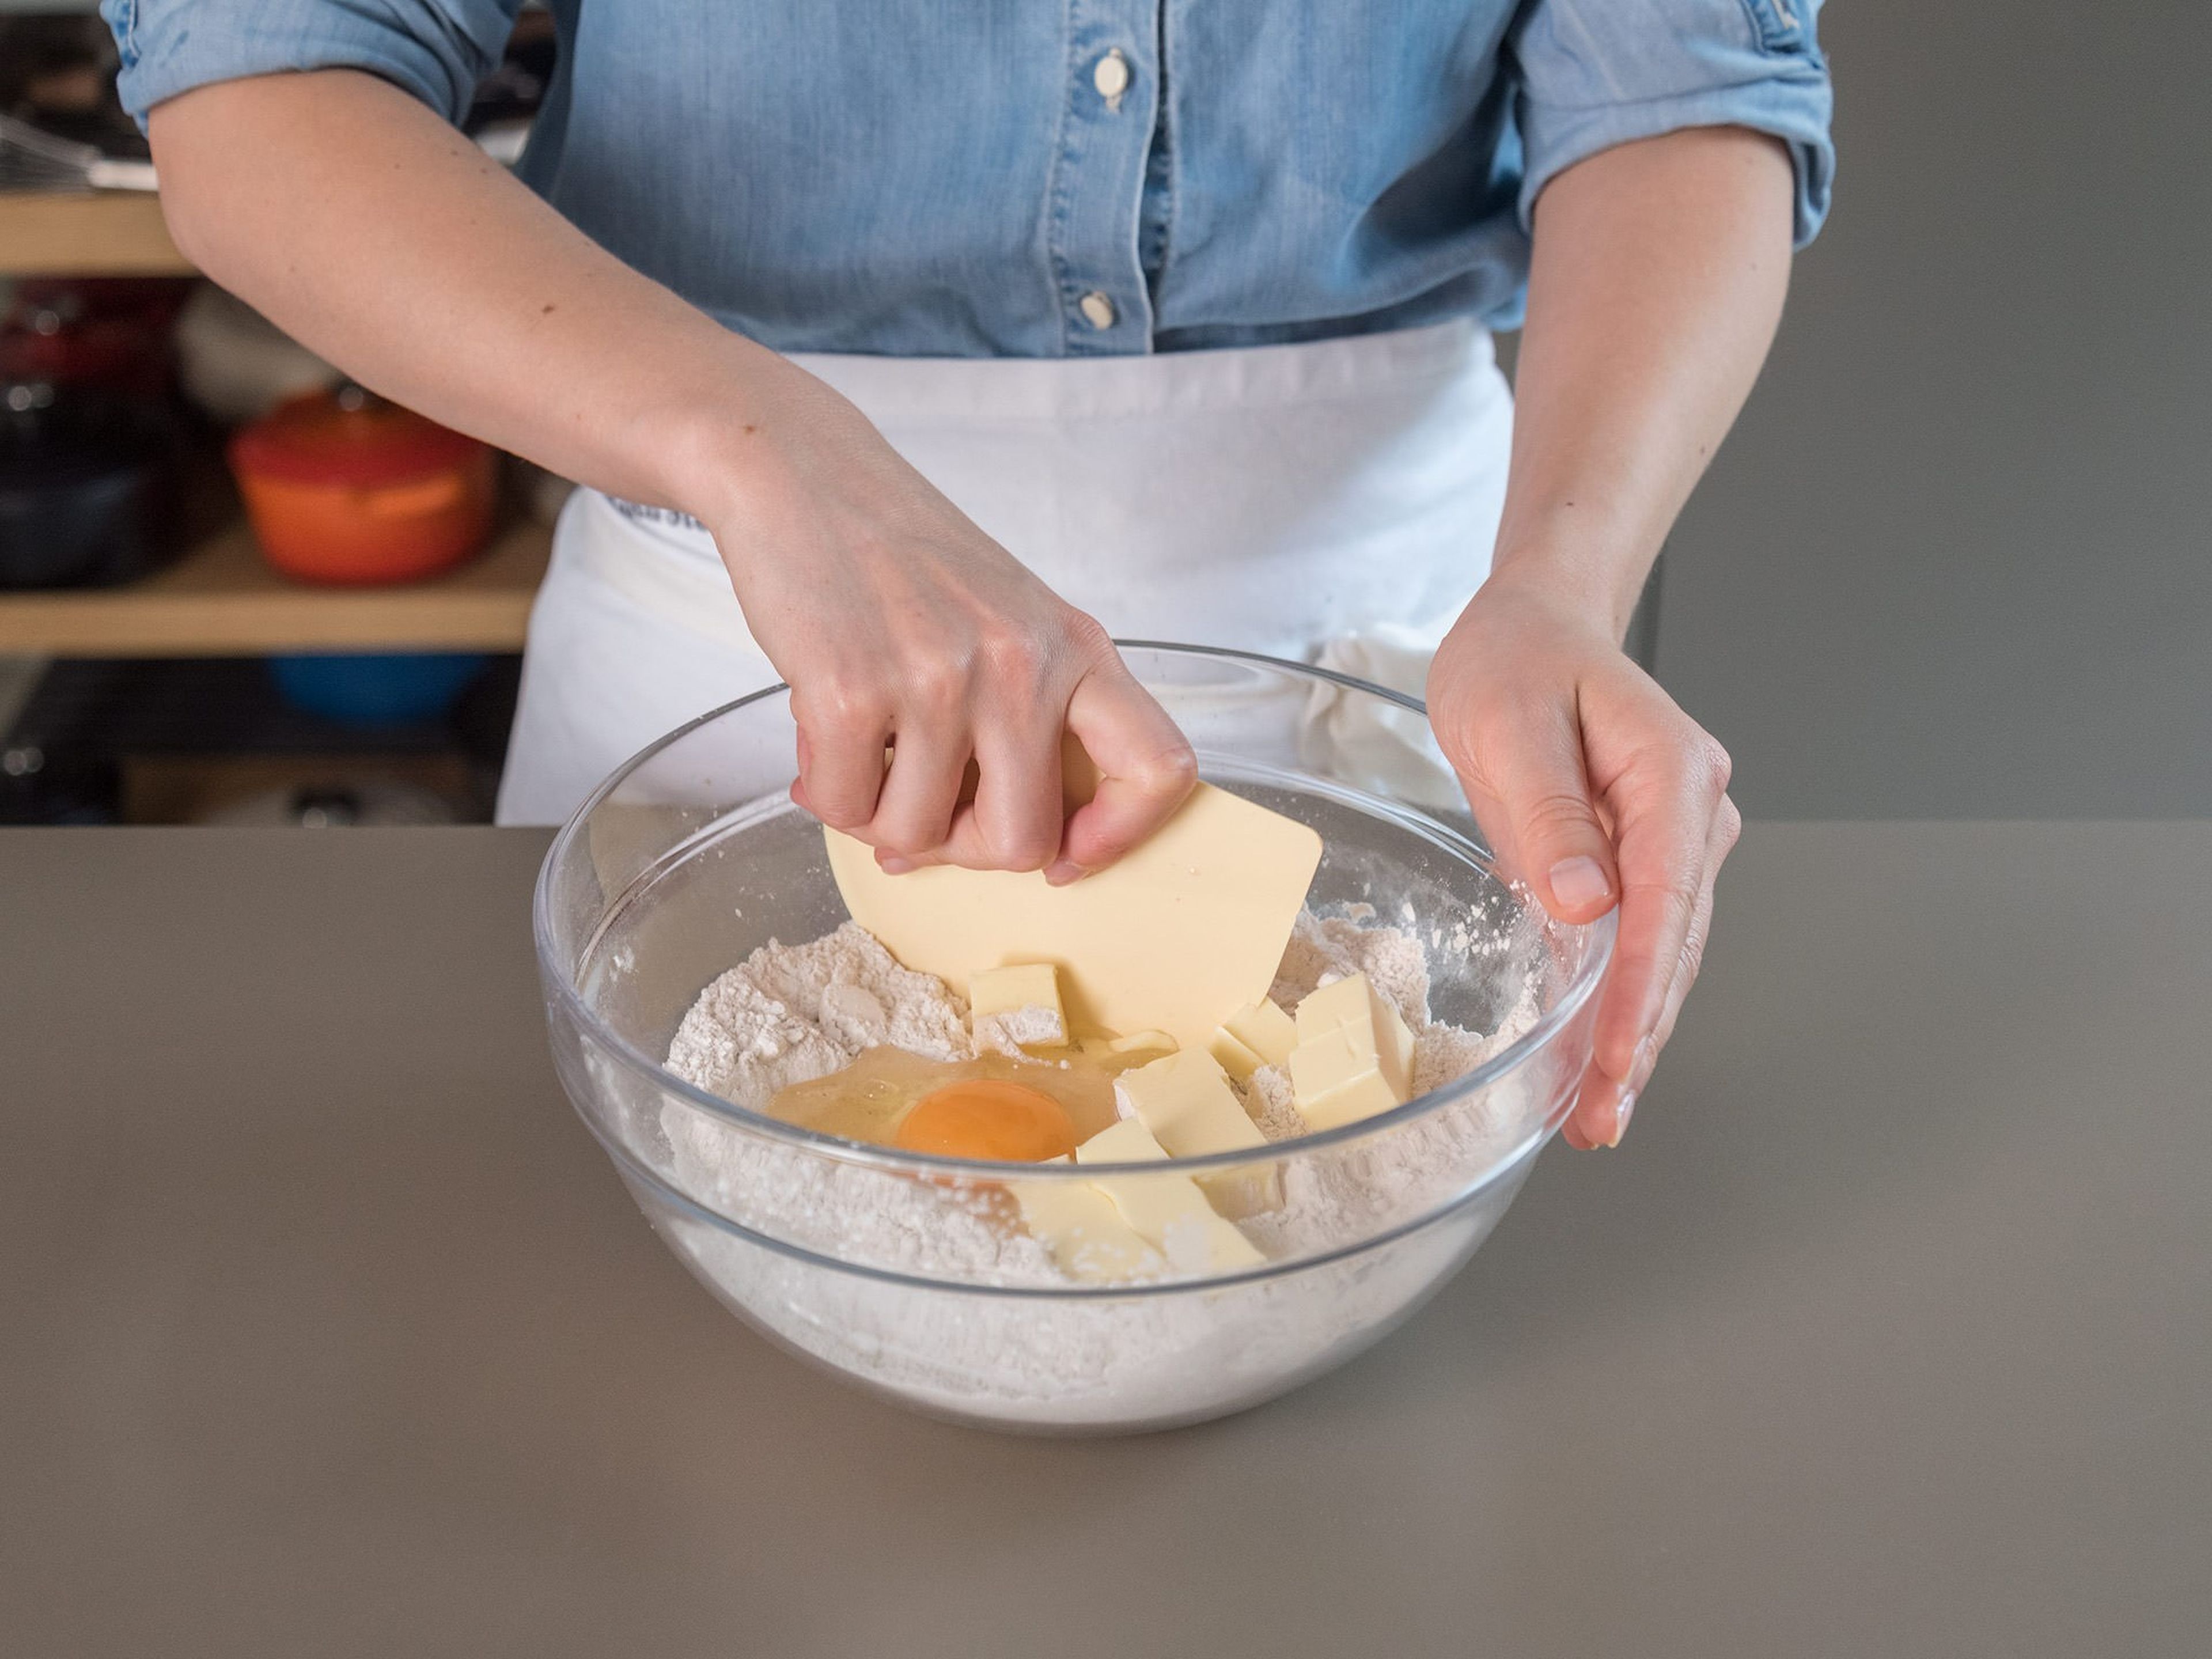 Combine the flour, corn starch, salt, and xanthan gum in a large mixing bowl. Knead in the egg and butter, little by little until combined and a dough forms. Form into a ball, cover with plastic wrap, and transfer to the fridge to rest for approx. 30 min.